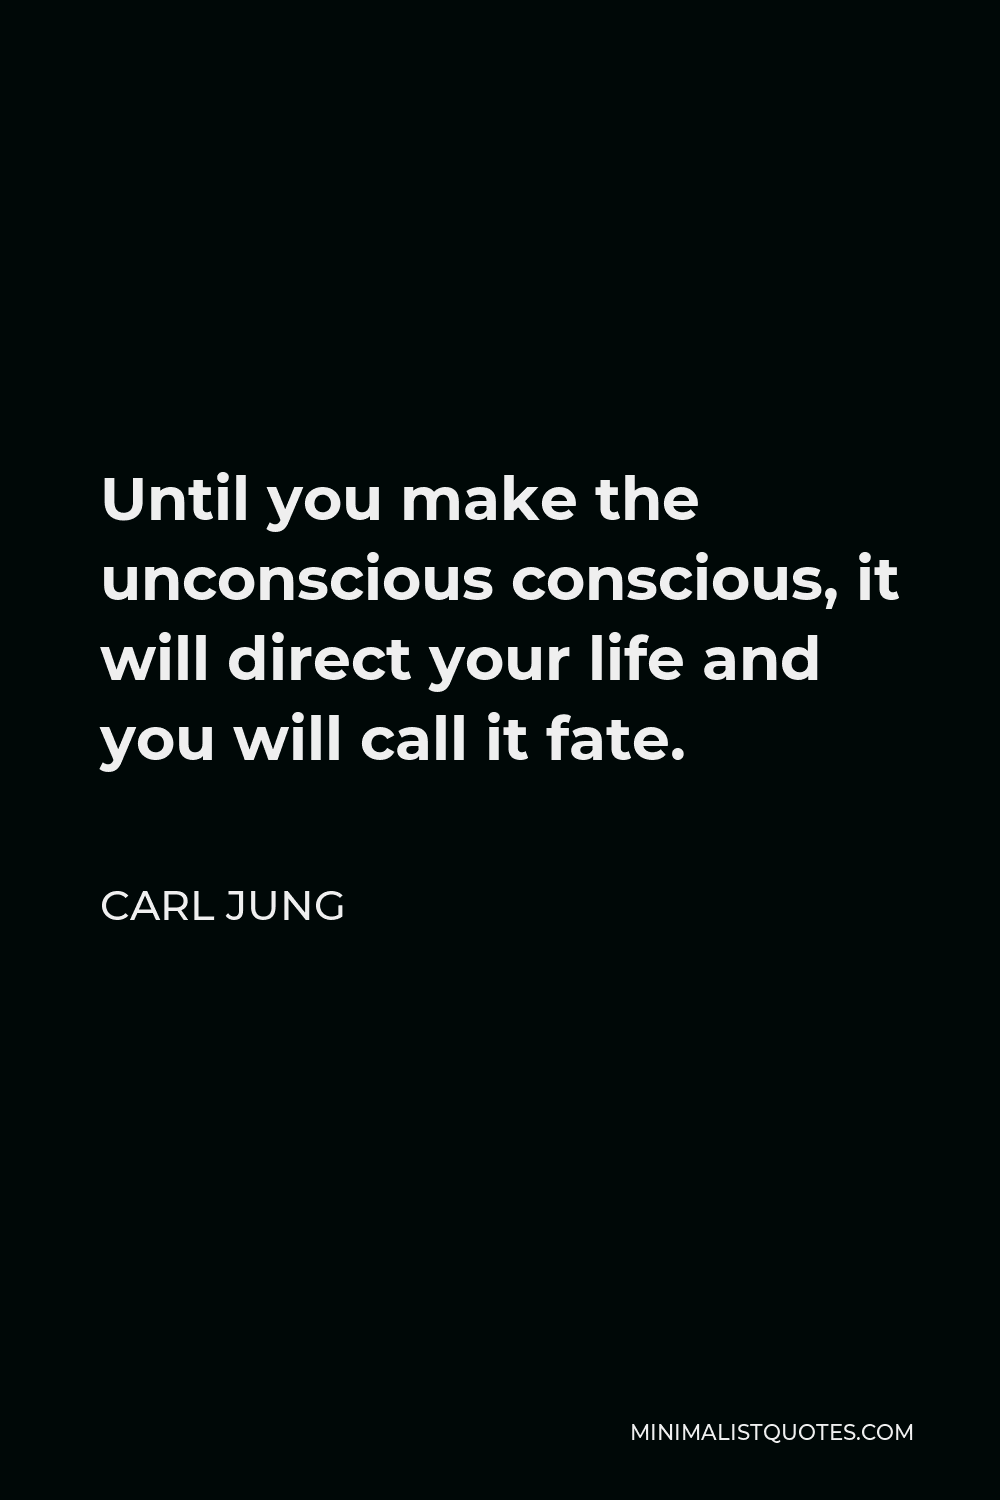 Carl Jung Quote - Until you make the unconscious conscious, it will direct your life and you will call it fate.